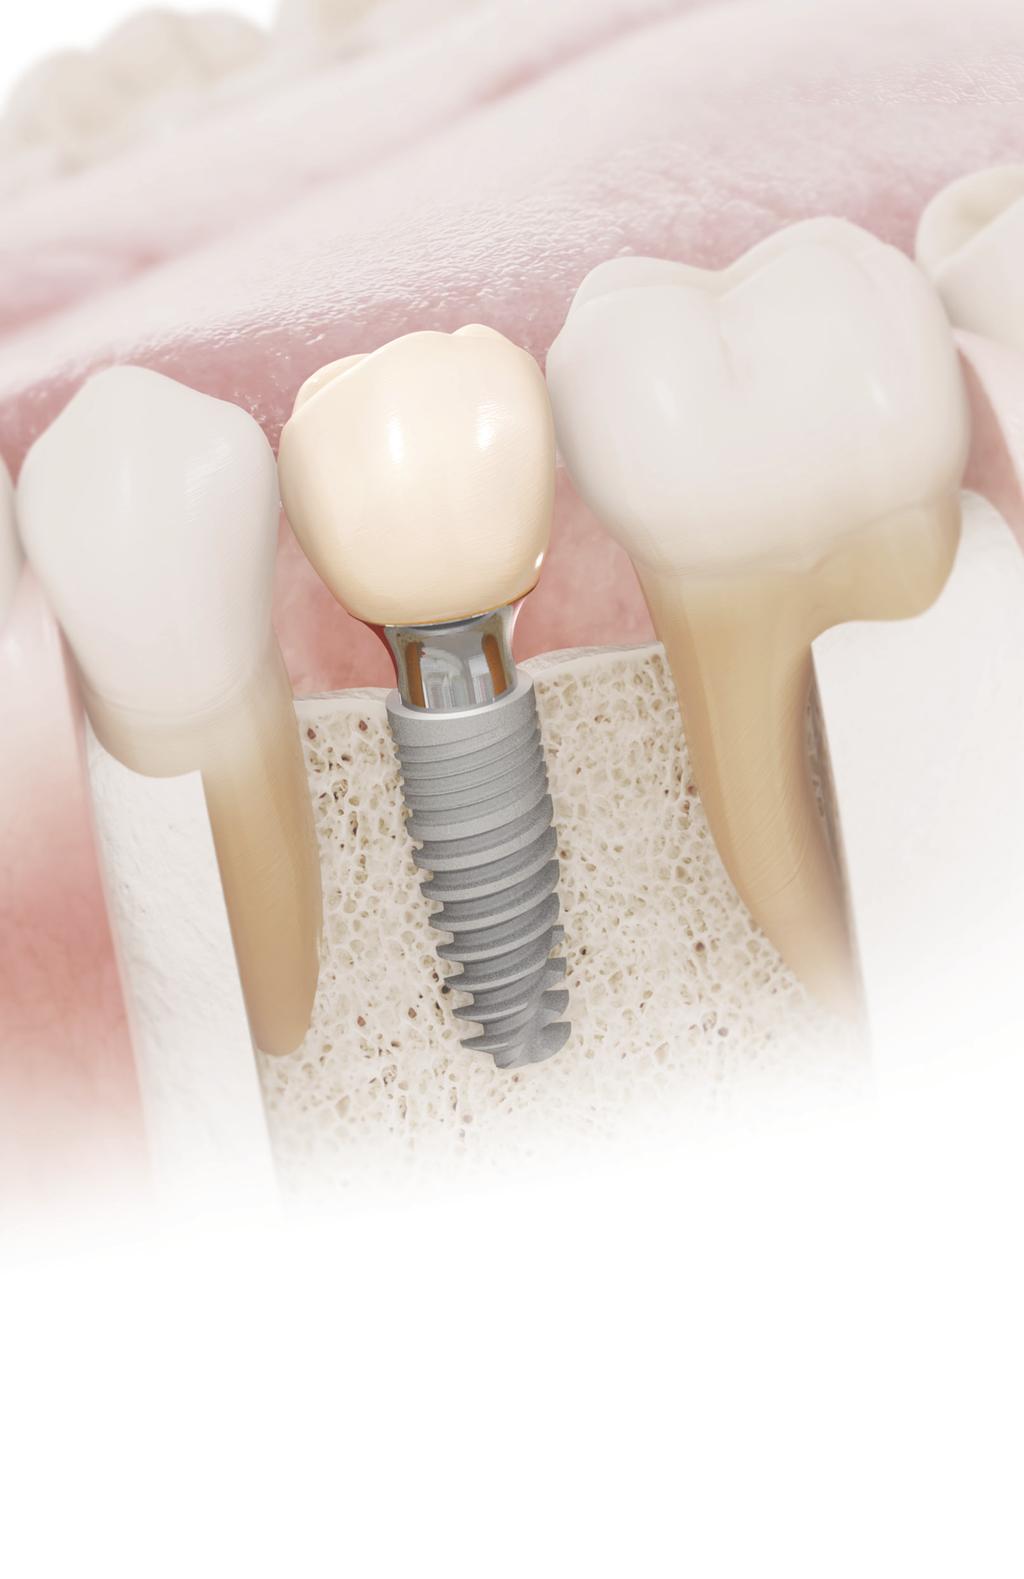 What is Dental Implants? Dental Prosthesis The final restoration (crown, bridge or denture) supported by the dental implants.